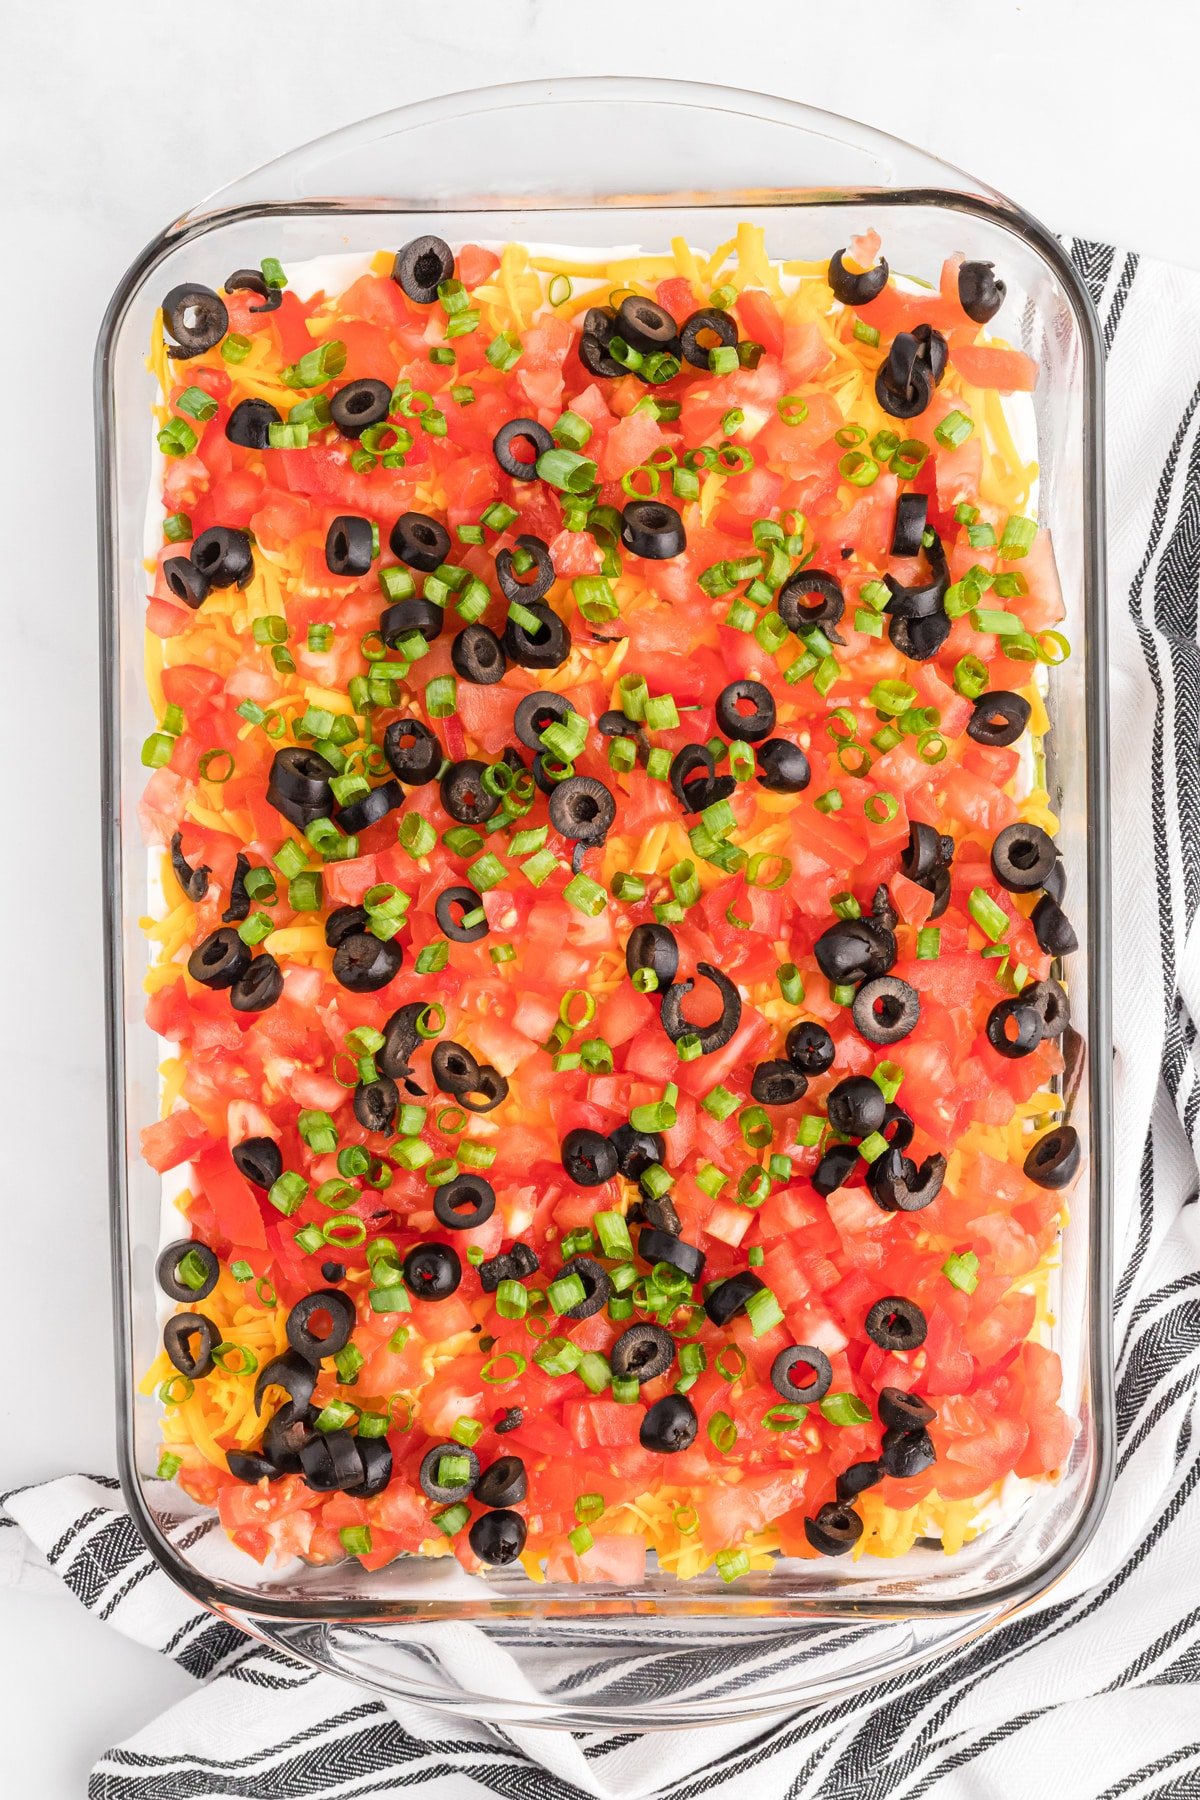 Overhead view of 7 layer dip in a glass baking dish